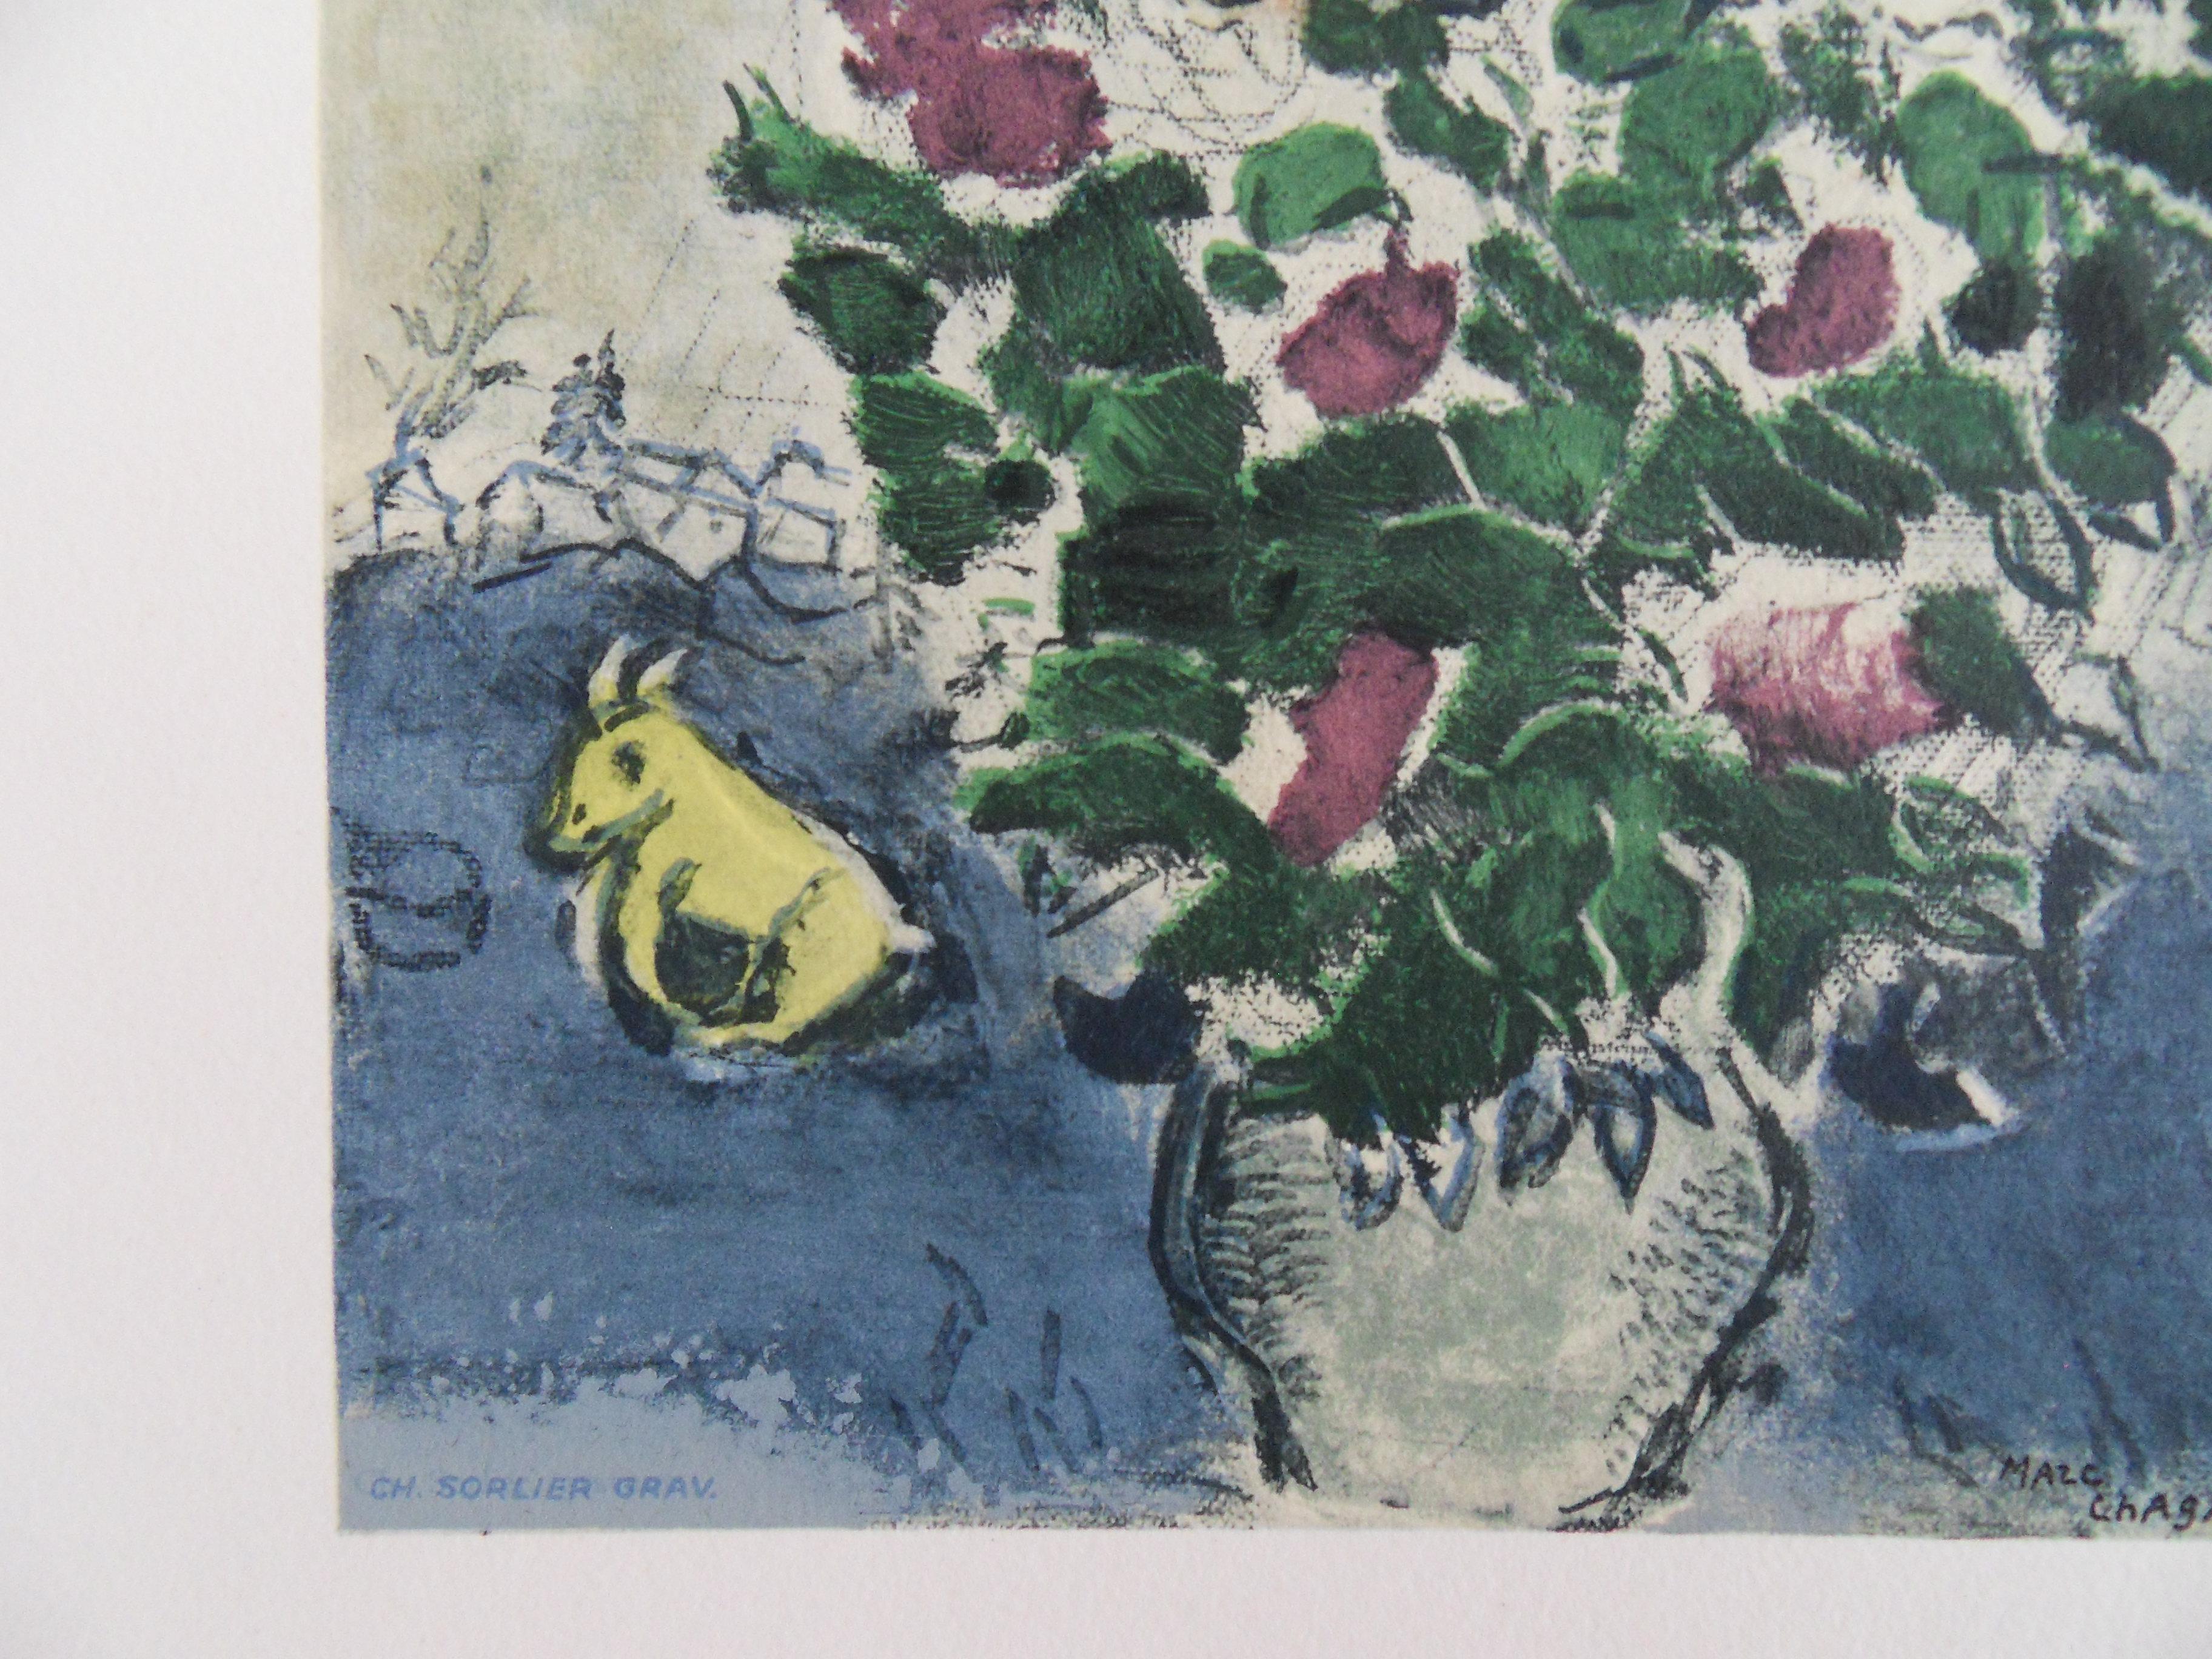 Lovers with Bouquet of Flowers - Original lithograph - 1965 - Modern Print by Marc Chagall